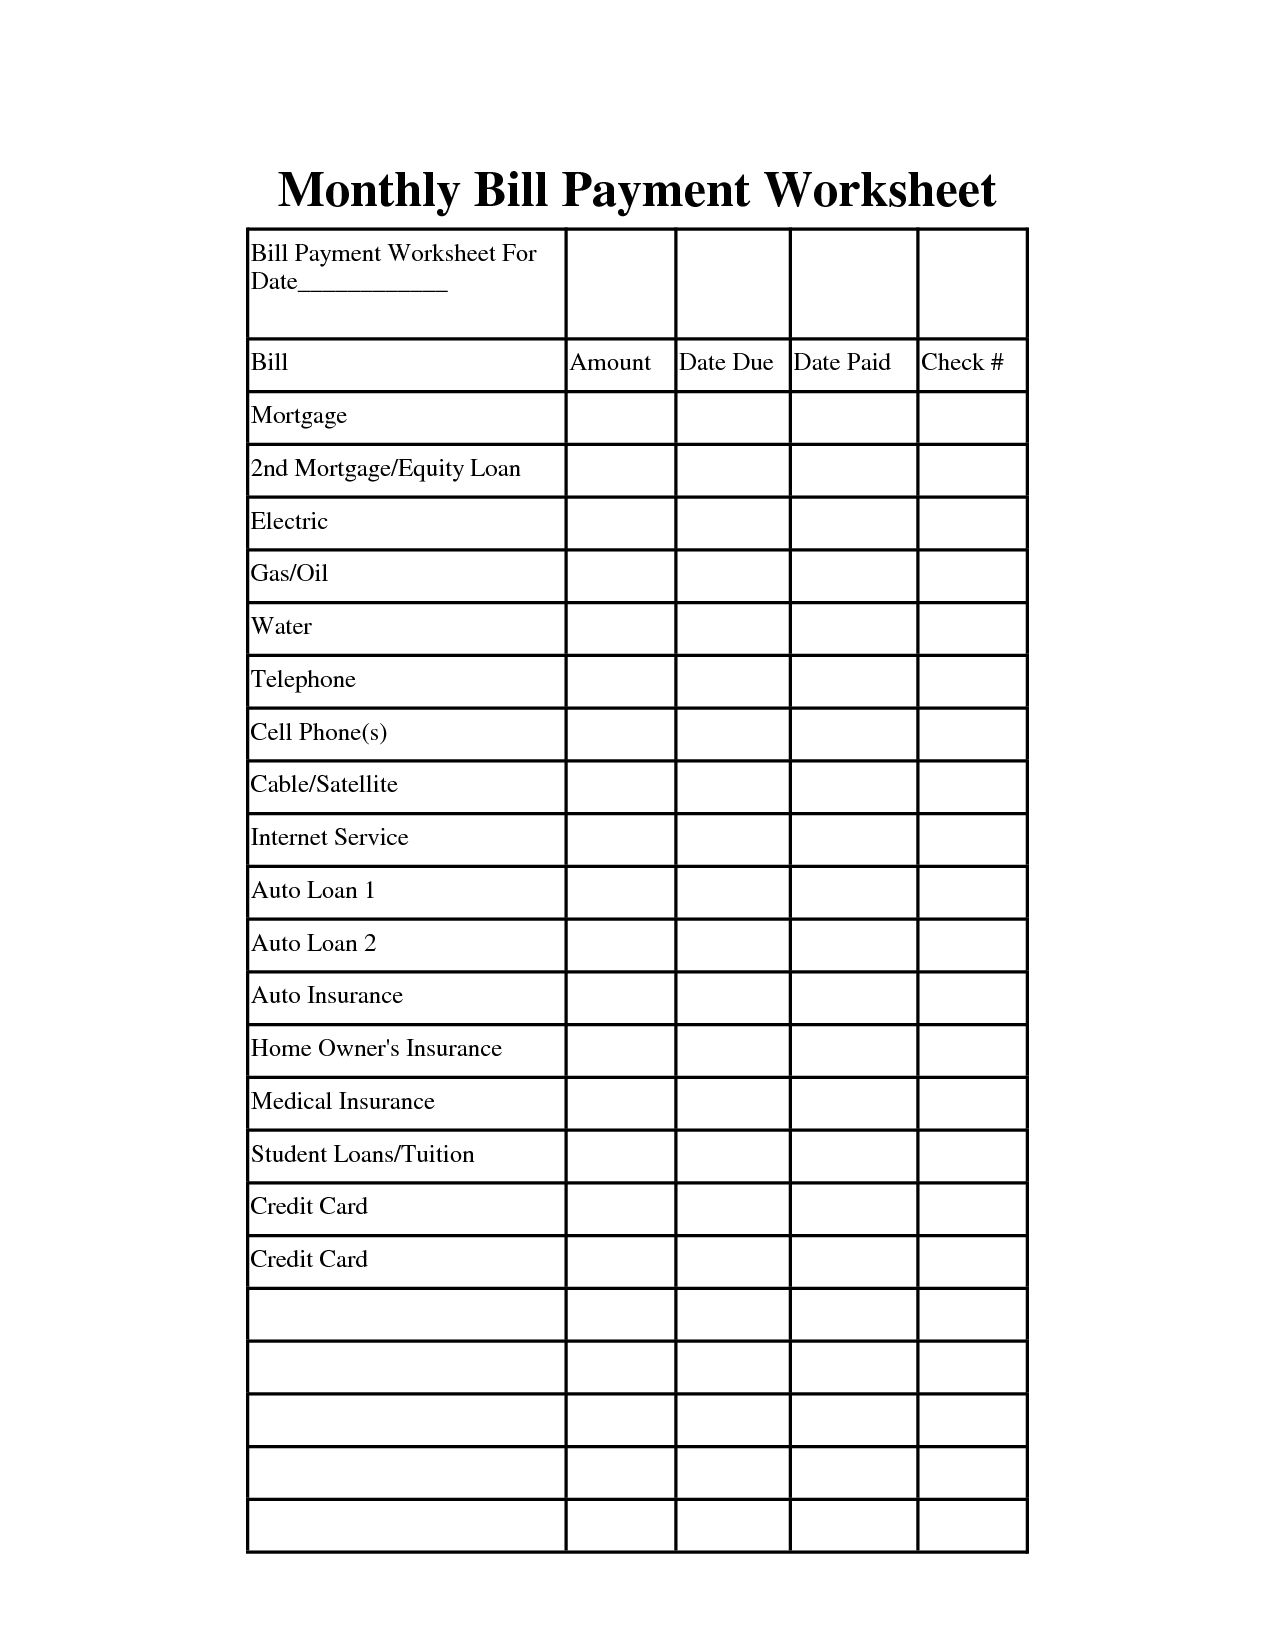 Bill Chart Template - Kubre.euforic.co-Free Printable Monthly Bill within Blank Monthly Bill Payment Worksheet